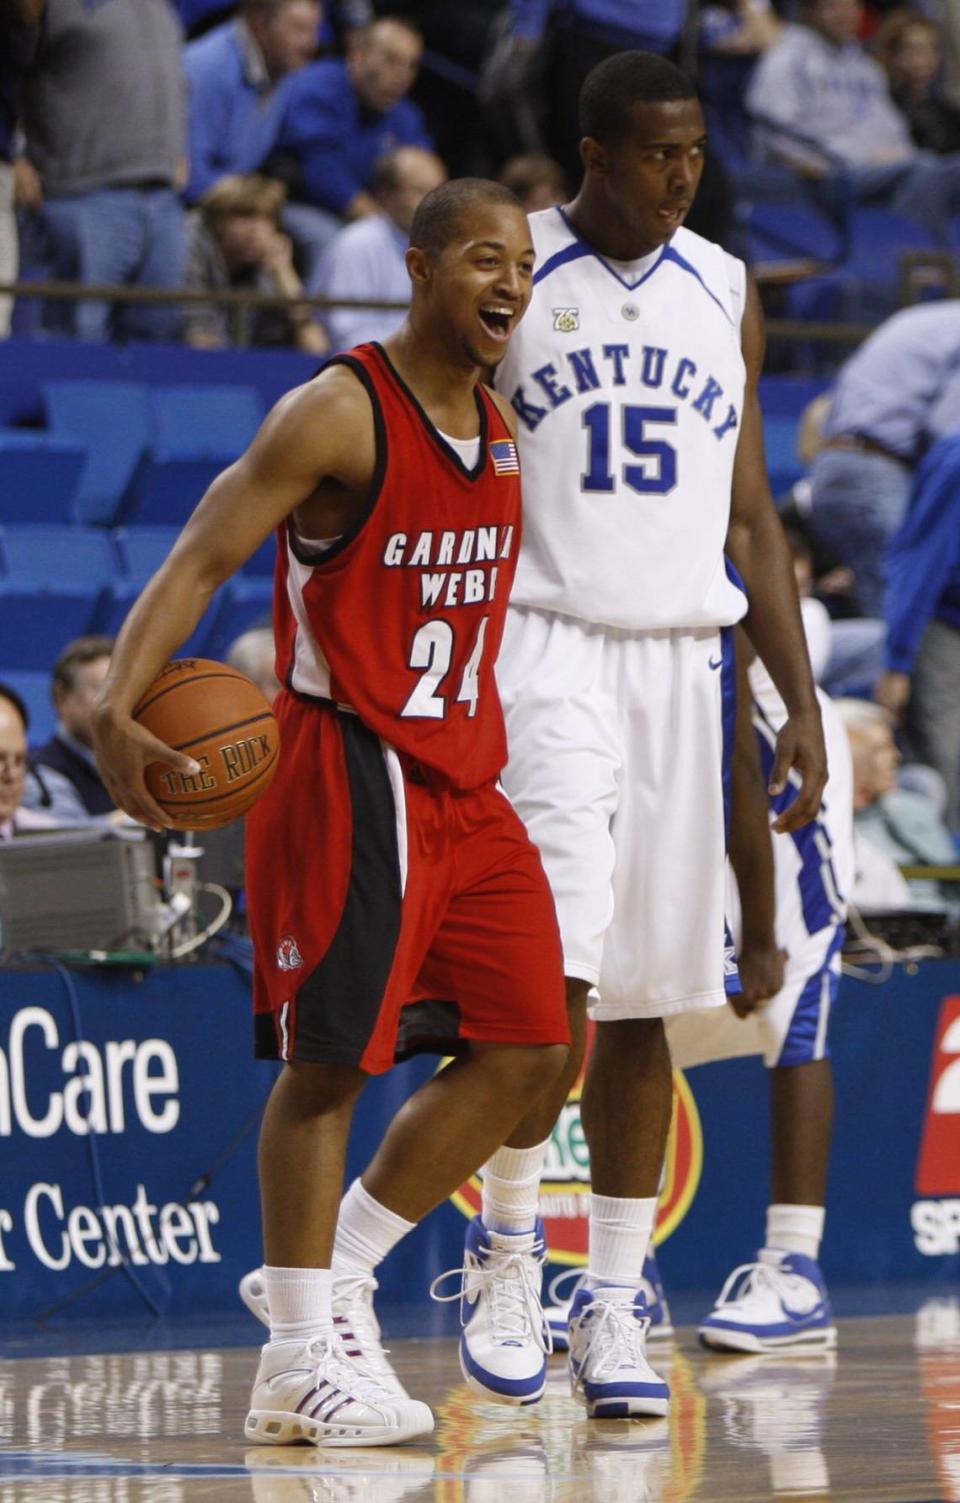 Gardner-Webb’s 84-68 upset of Kentucky in 2007-08 ended with the basketball in the hands of guard Takayo Siddle. On Saturday, Siddle will return to Rupp Arena as the head coach at UNC Wilmington.